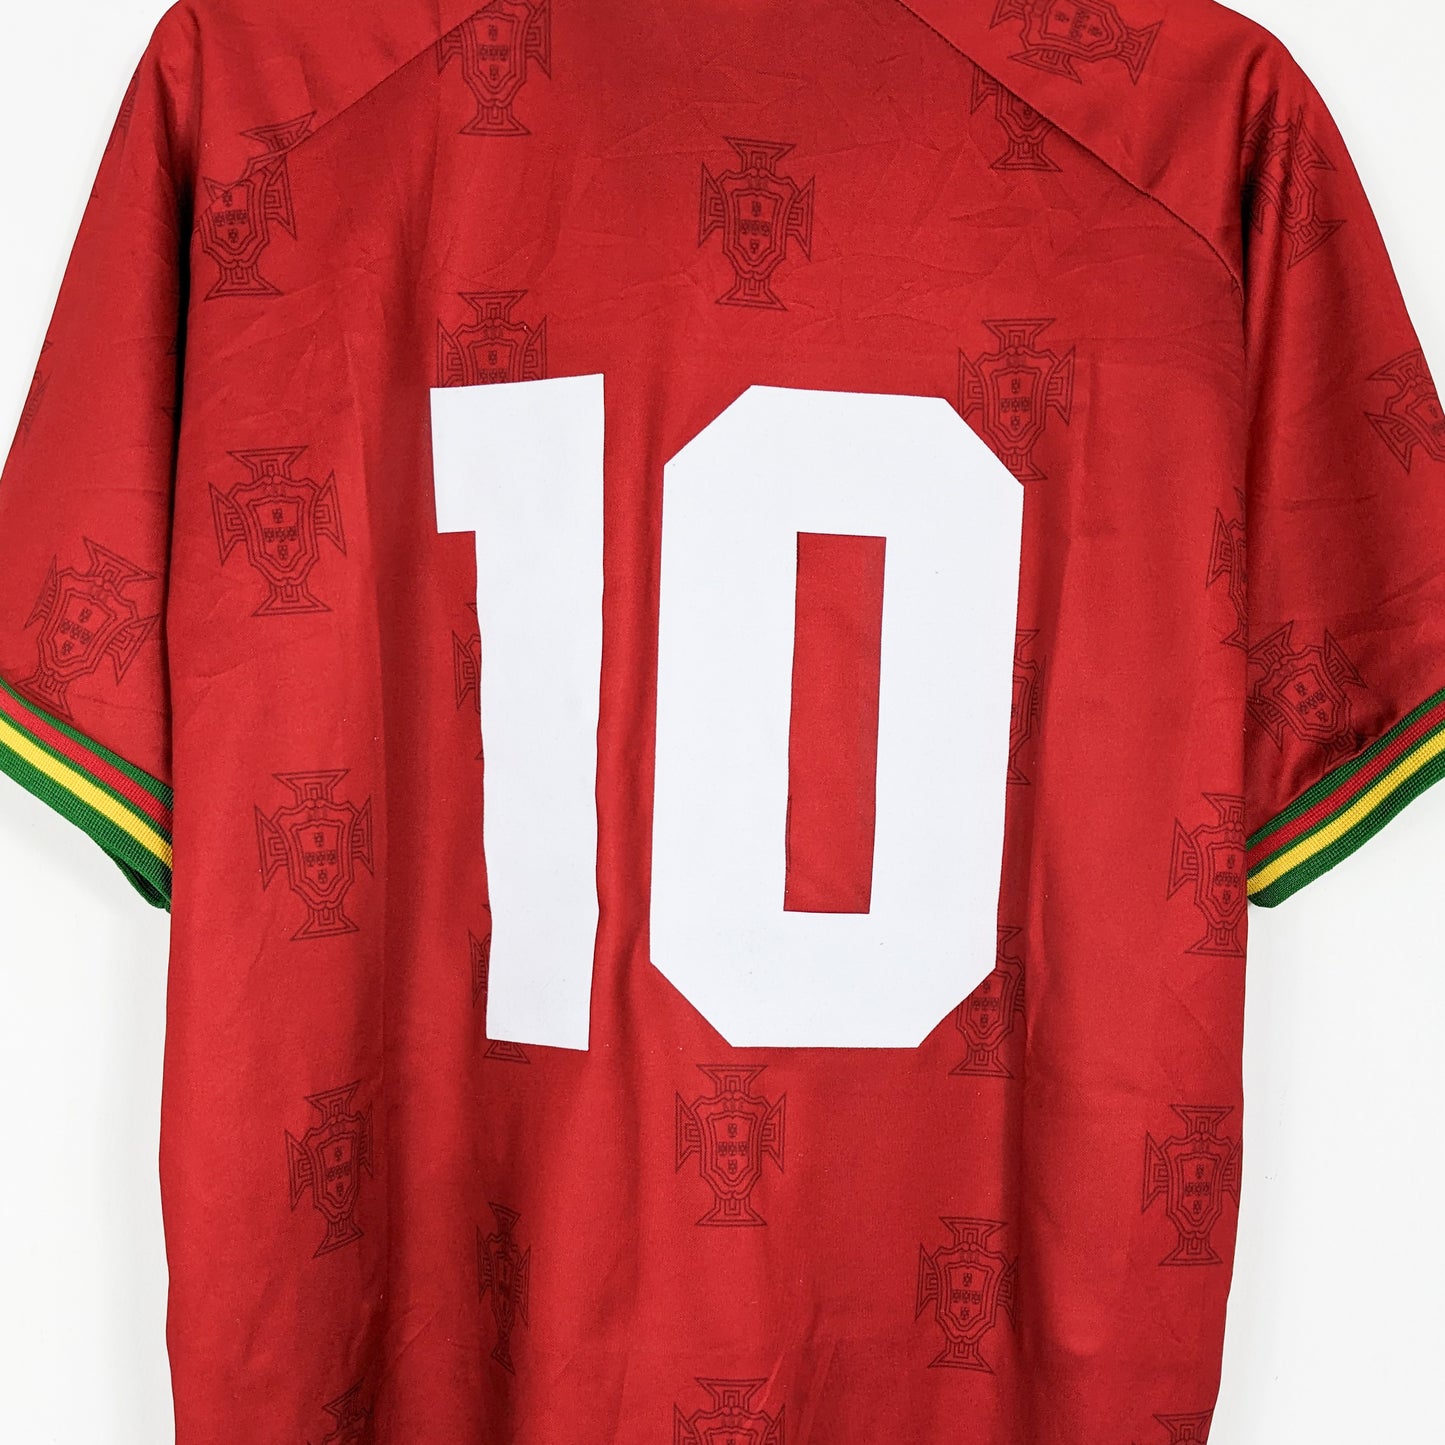 Authentic Portugal 1995/1996 Home - #10 Size L